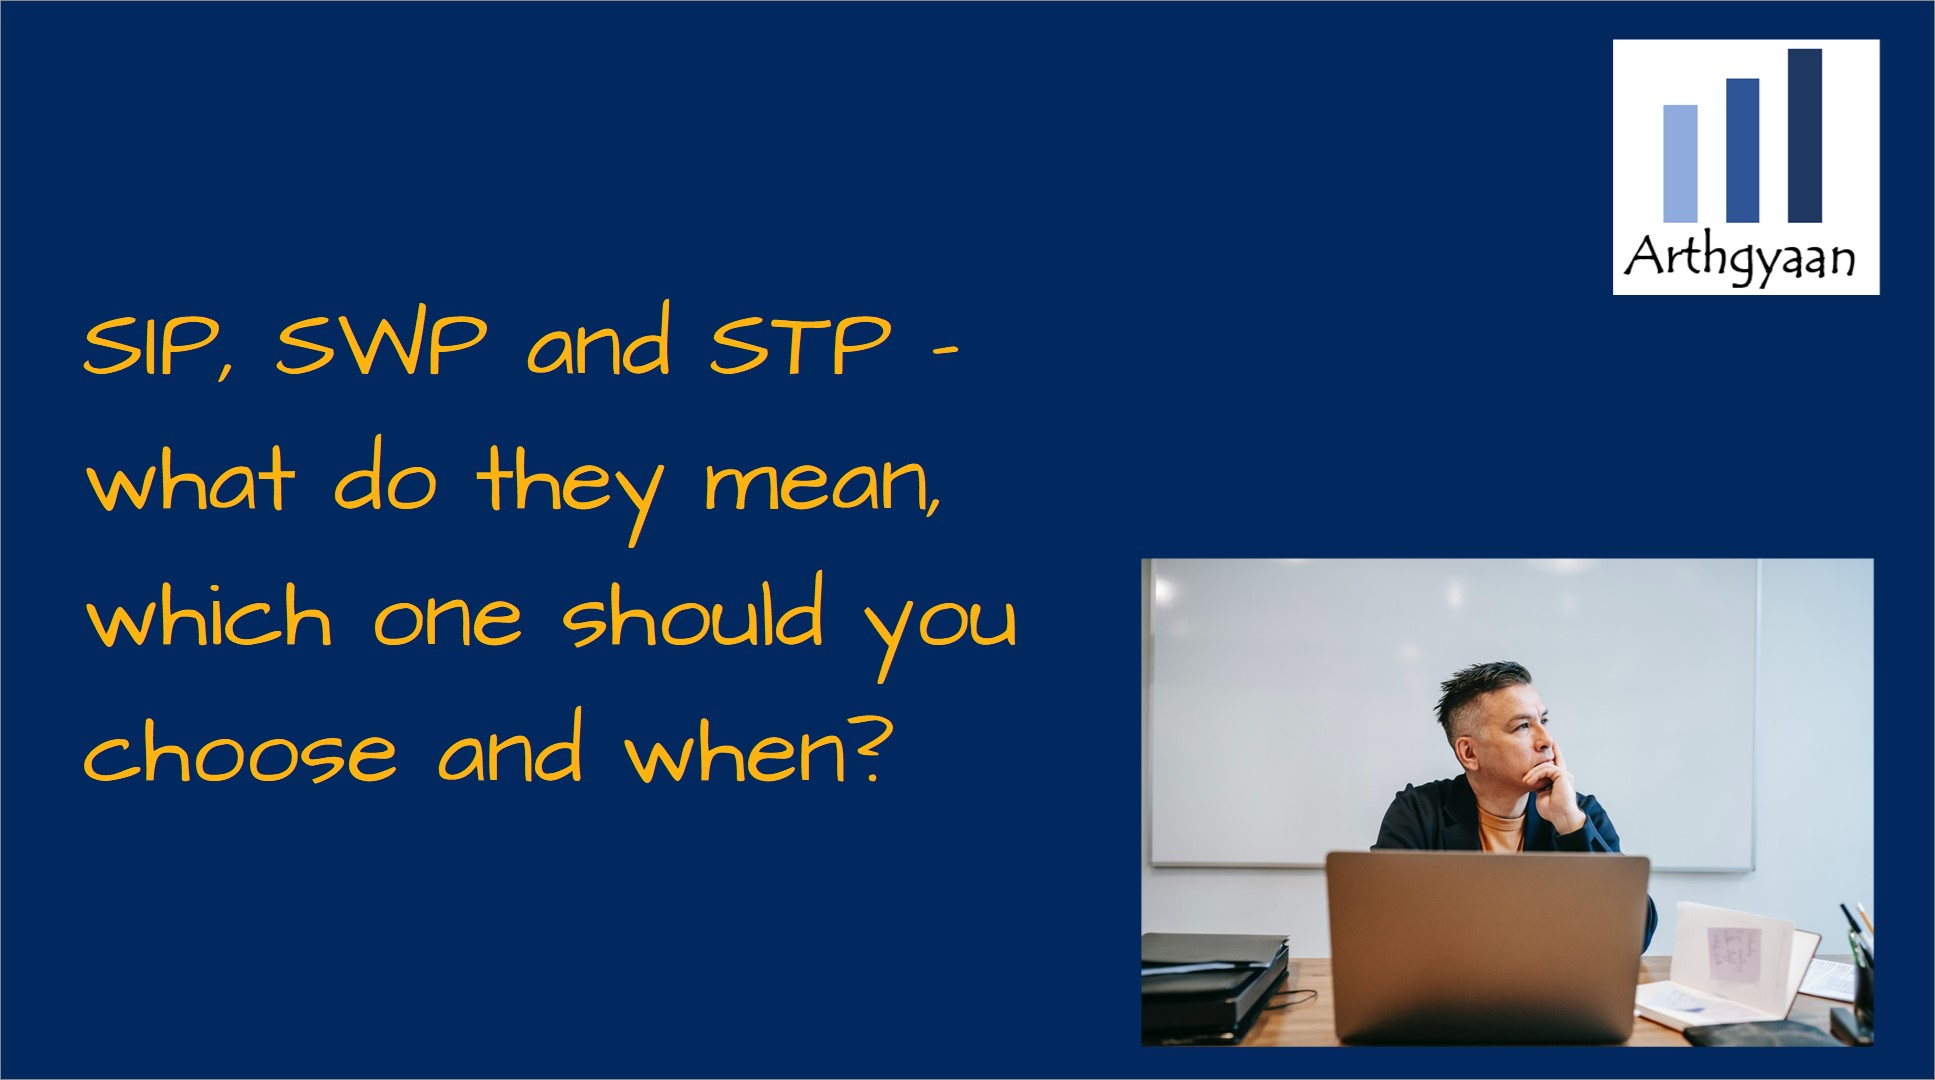 SIP, SWP and STP - what do they mean, which one should you choose and when?